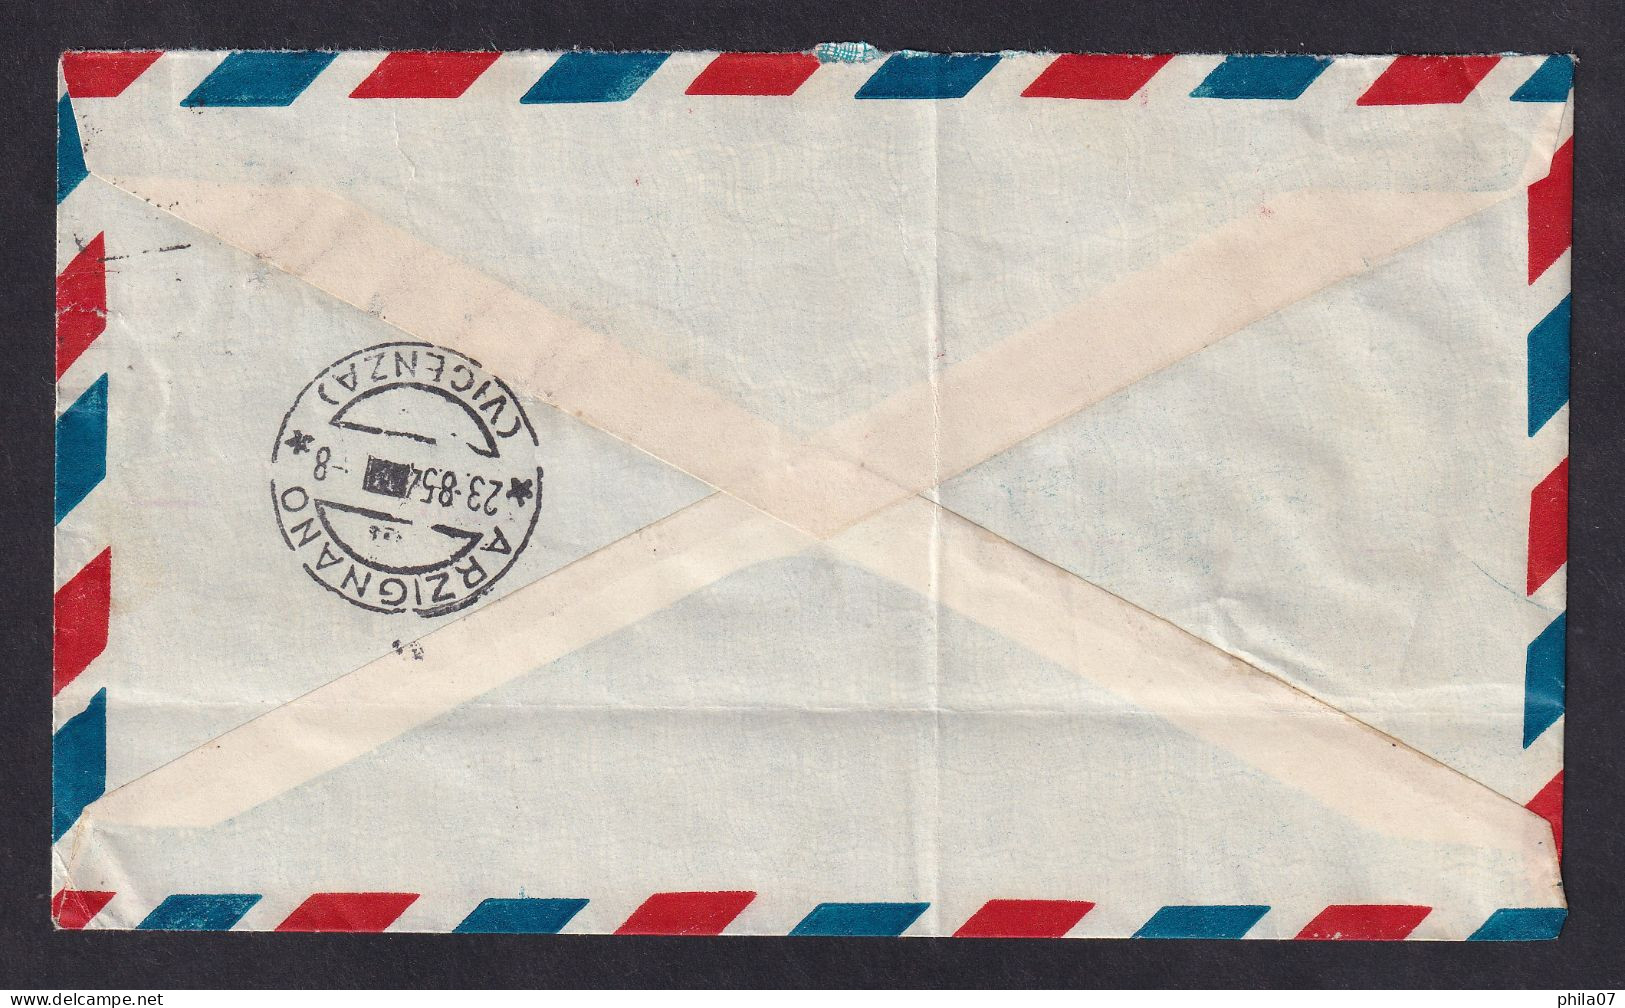 THAILAND - Envelope Sent Via Air Mail From Bangkok To Italy 1954, Nice Franking And Cancels / 2 Scans - Thailand